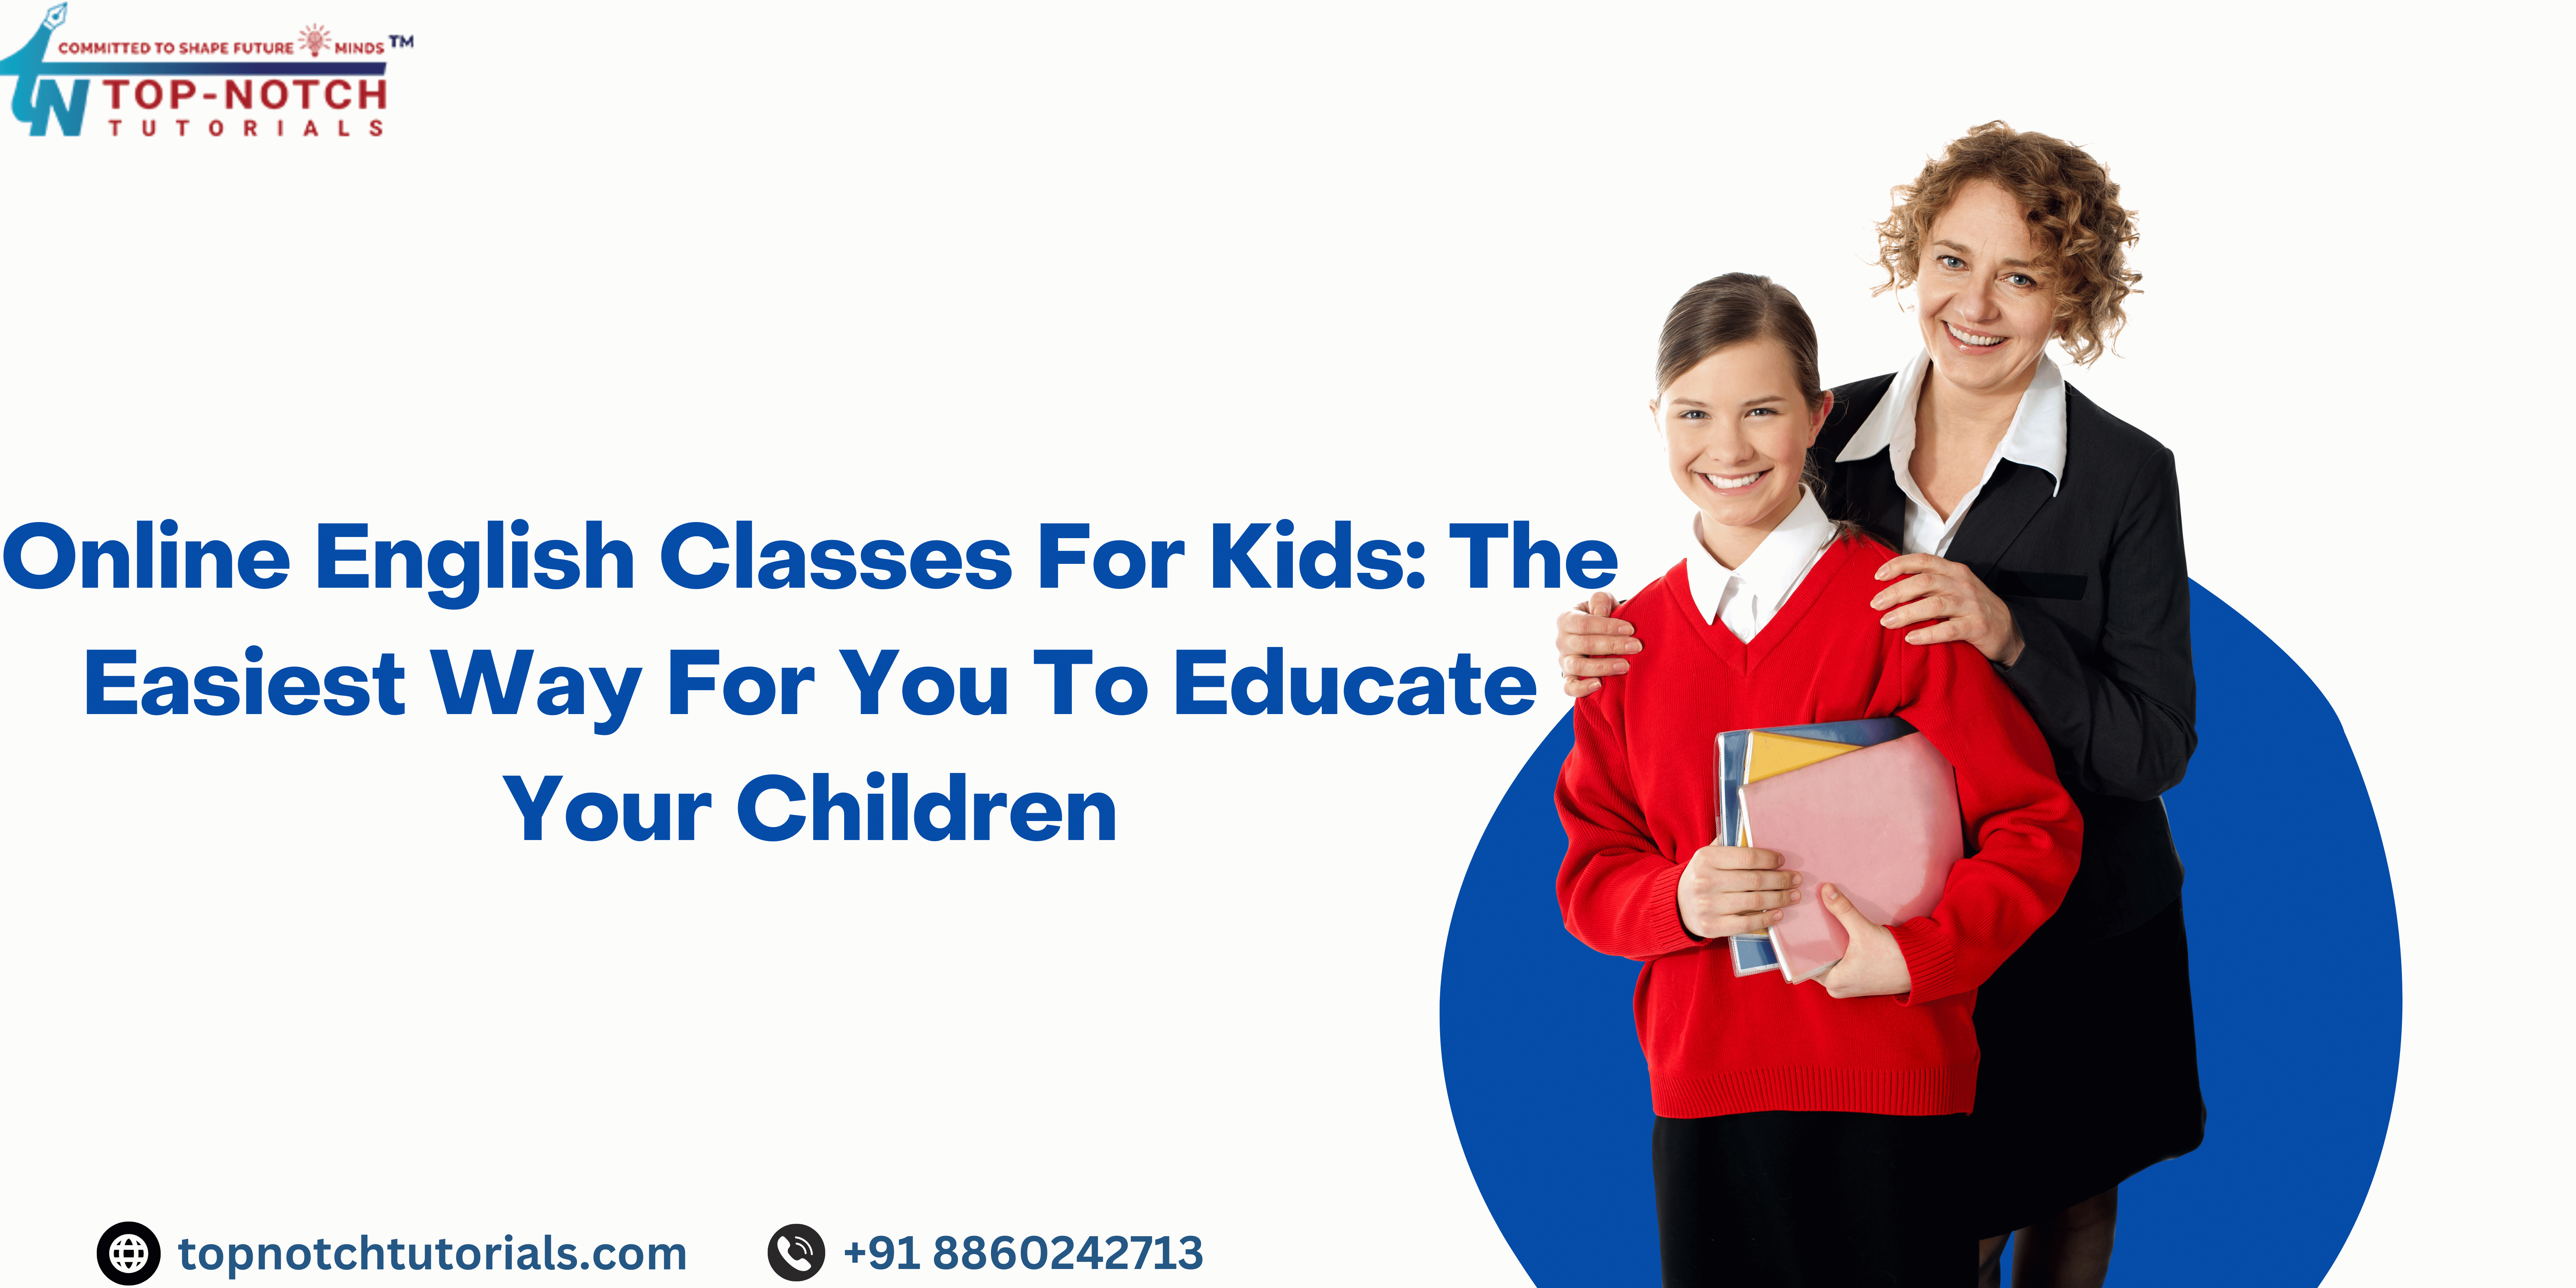 Online English classes for kids: the easiest way for you to educate your children